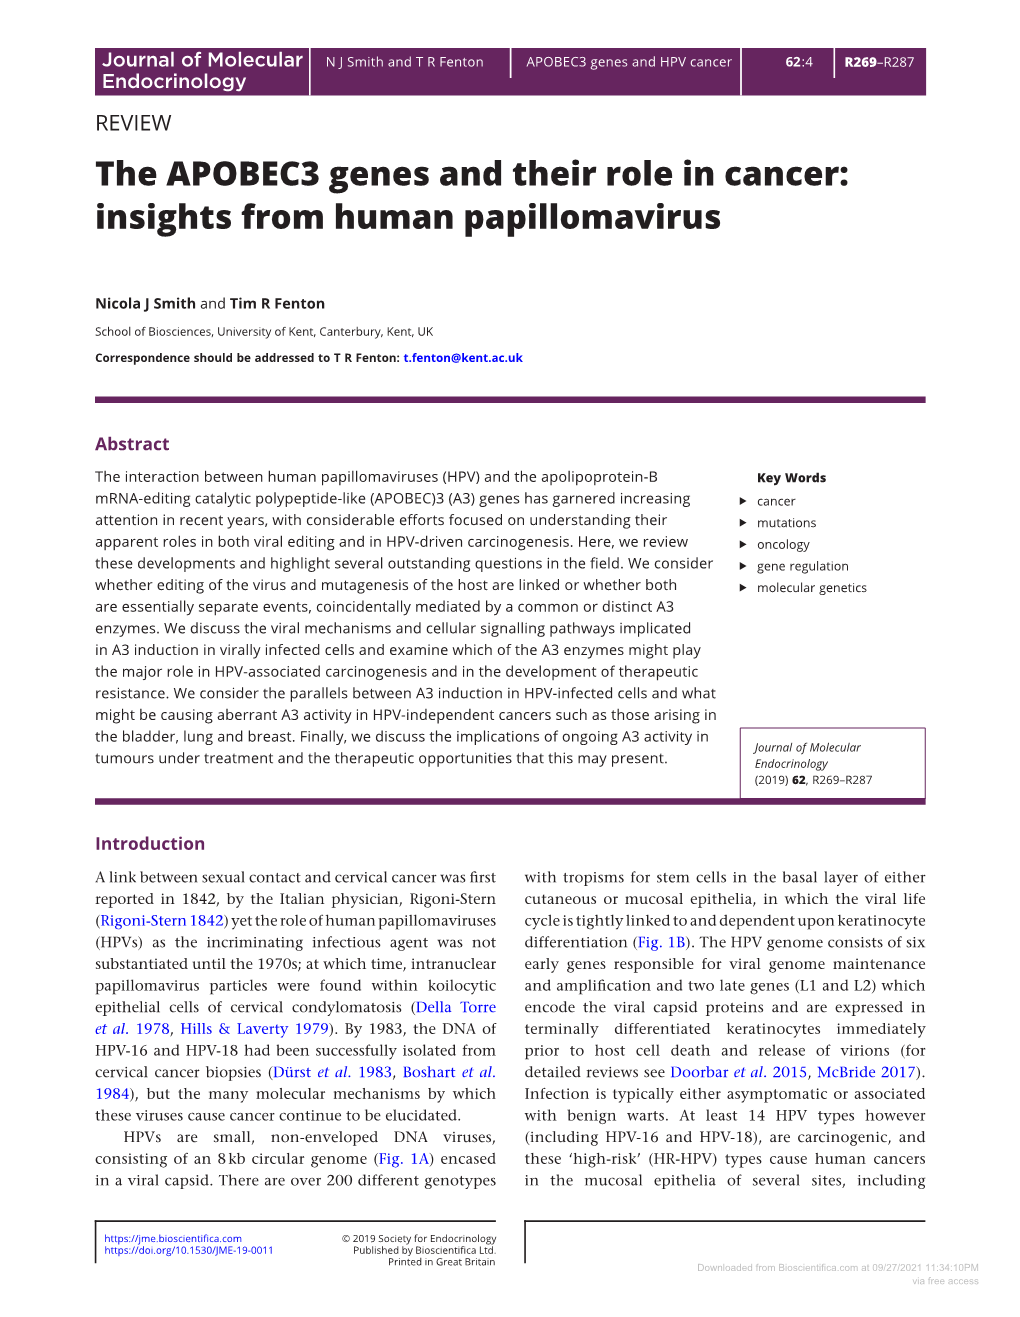 The APOBEC3 Genes and Their Role in Cancer: Insights from Human Papillomavirus